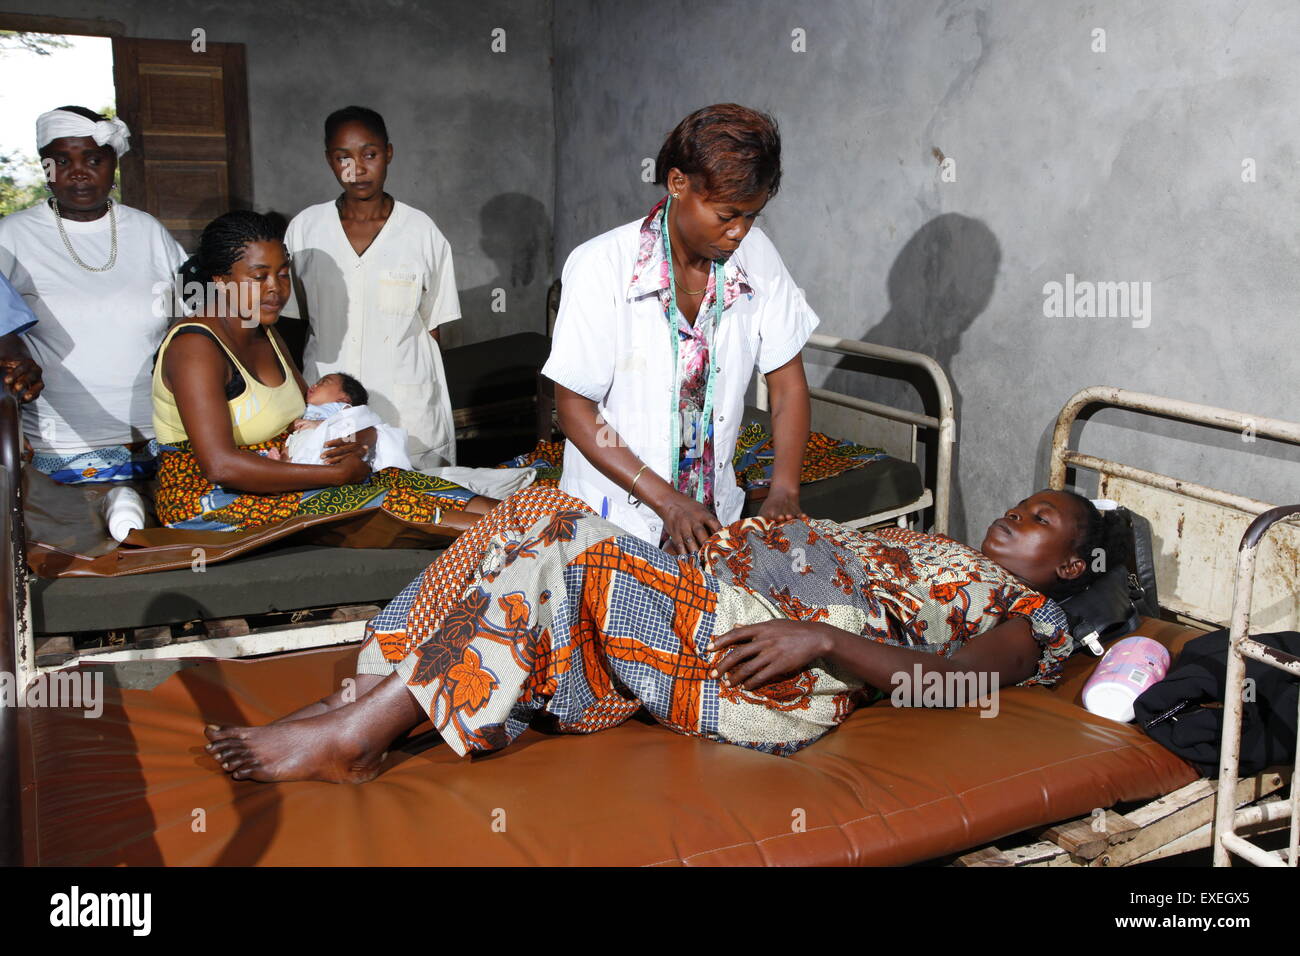 Pregnant woman being examined by a doctor, at the hospital, Matamba-Solo, Kawongo district, Bandundu Province, Congo-Brazzaville Stock Photo